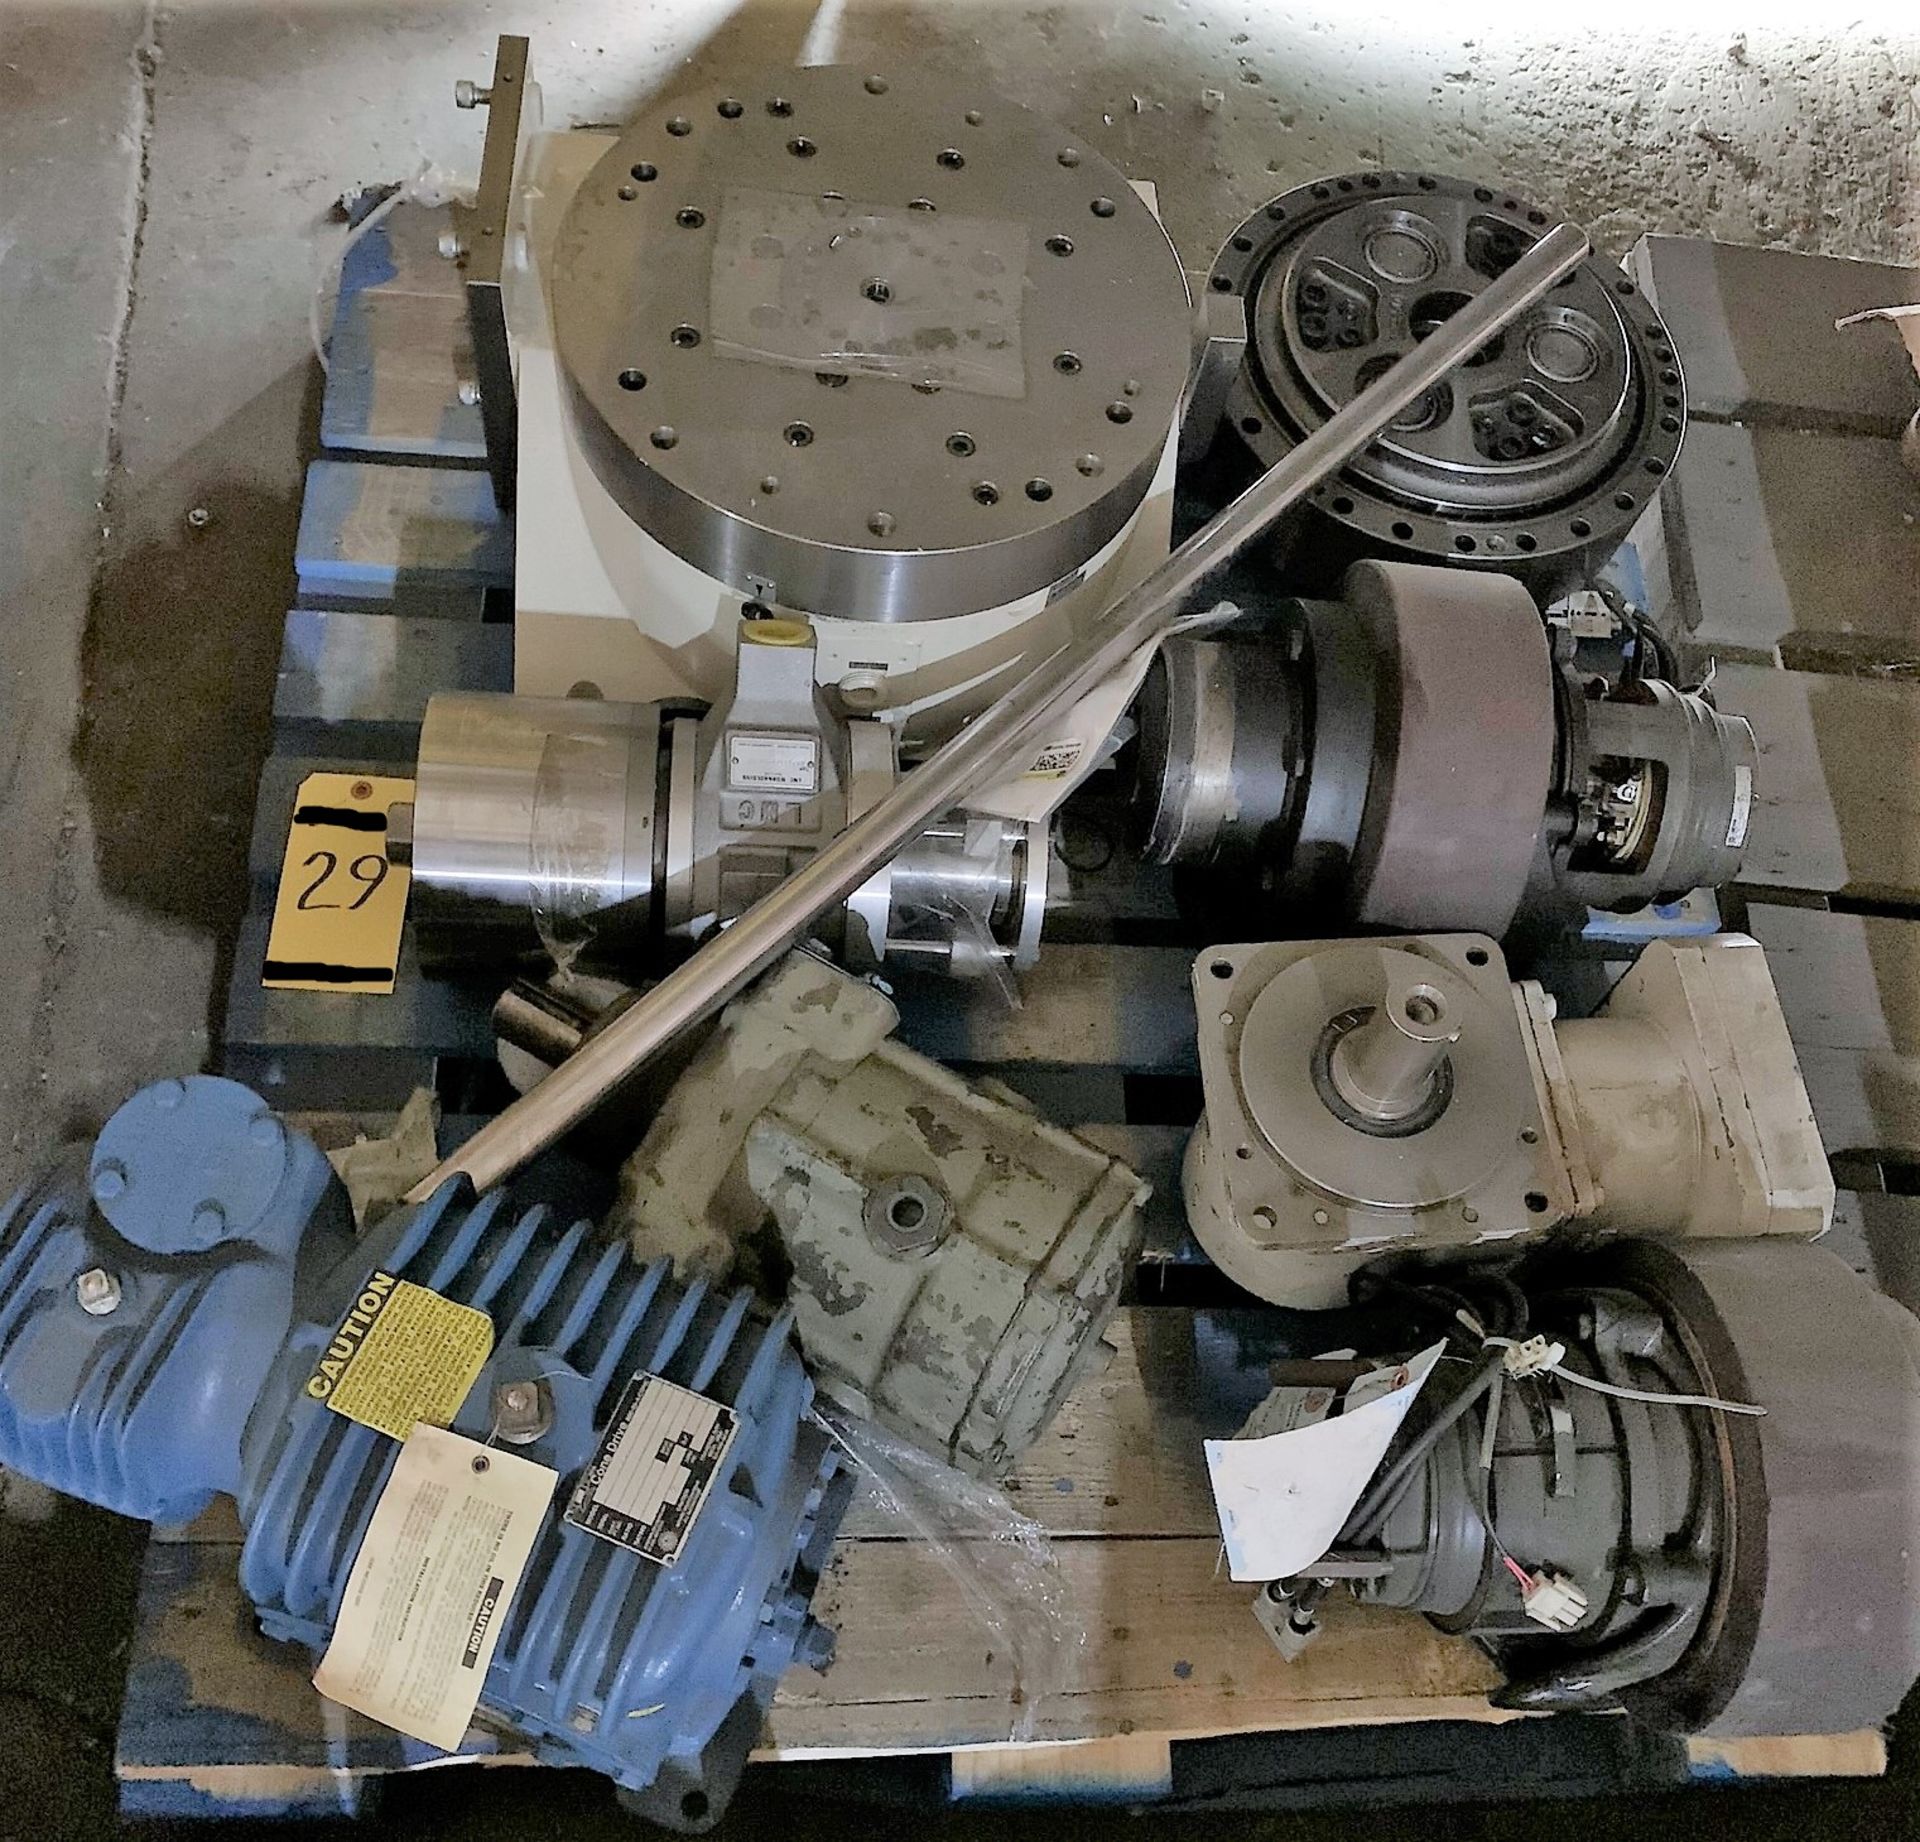 Lot of Assorted Gear Boxes, Rotary Table, RV Gear, & Pump